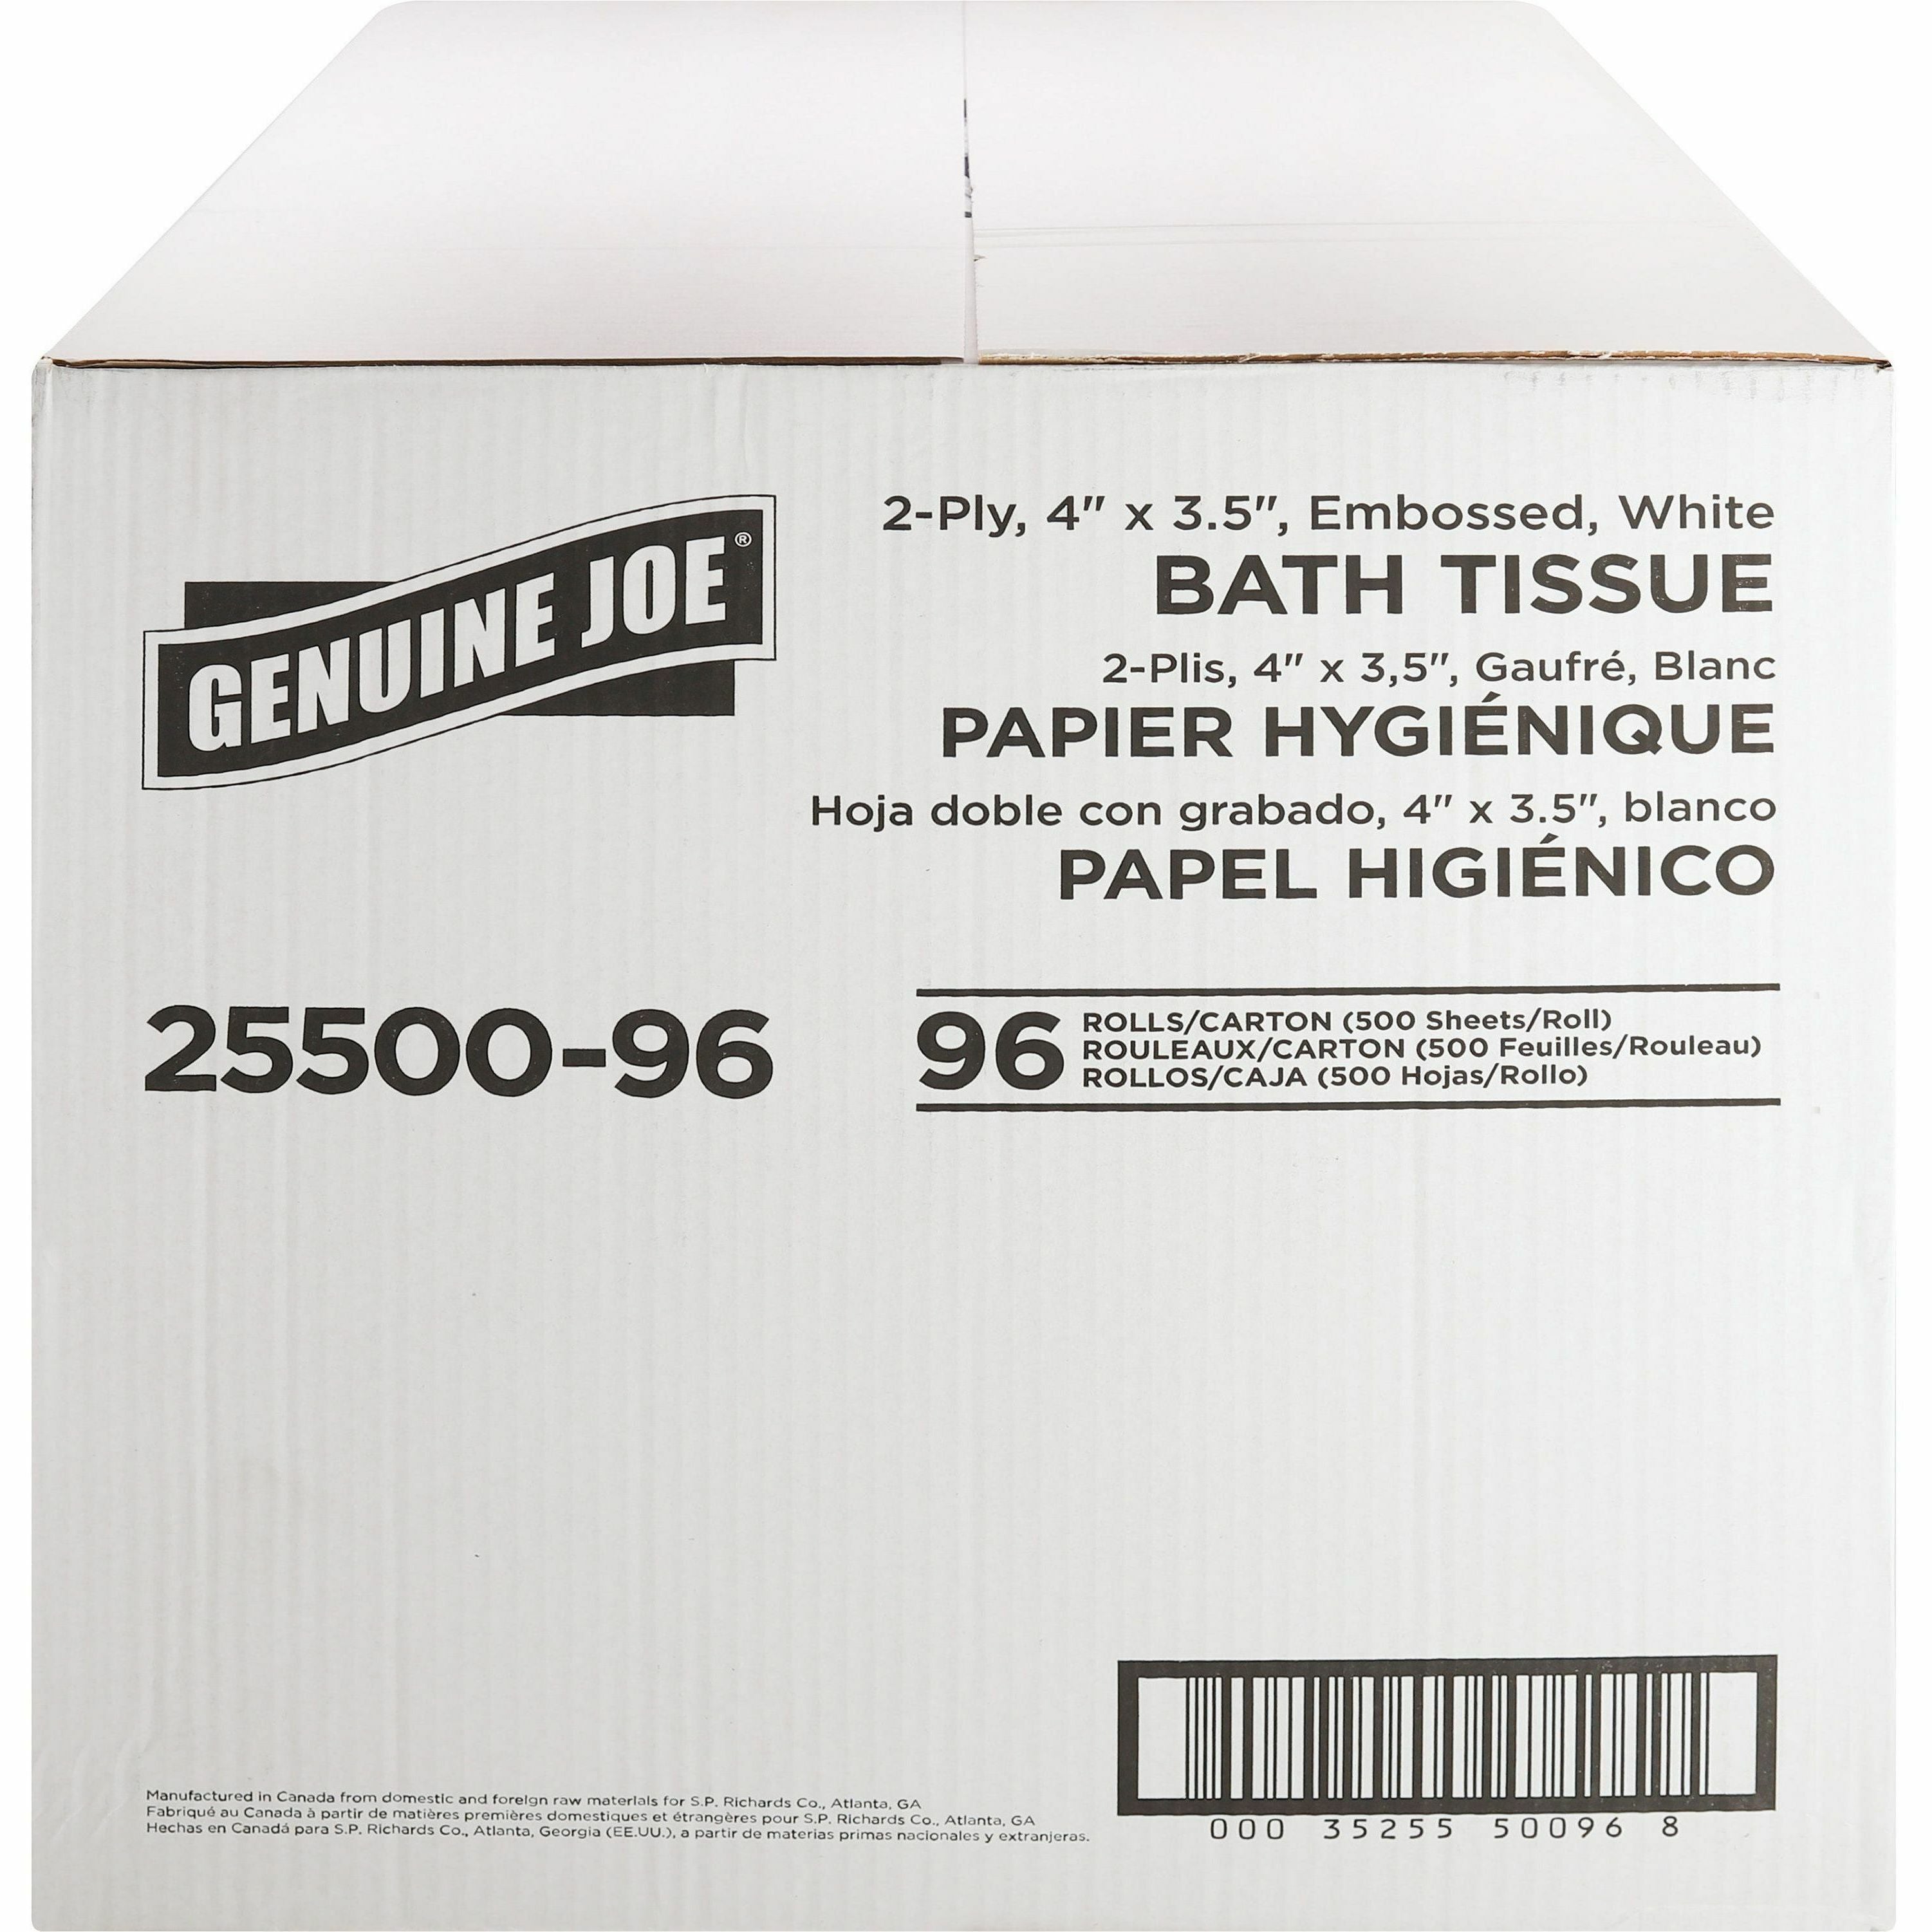 genuine-joe-2-ply-standard-bath-tissue-rolls-2-ply-4-x-320-500-sheets-roll-163-core-white-perforated-absorbent-soft-96-carton_gjo2550096 - 3